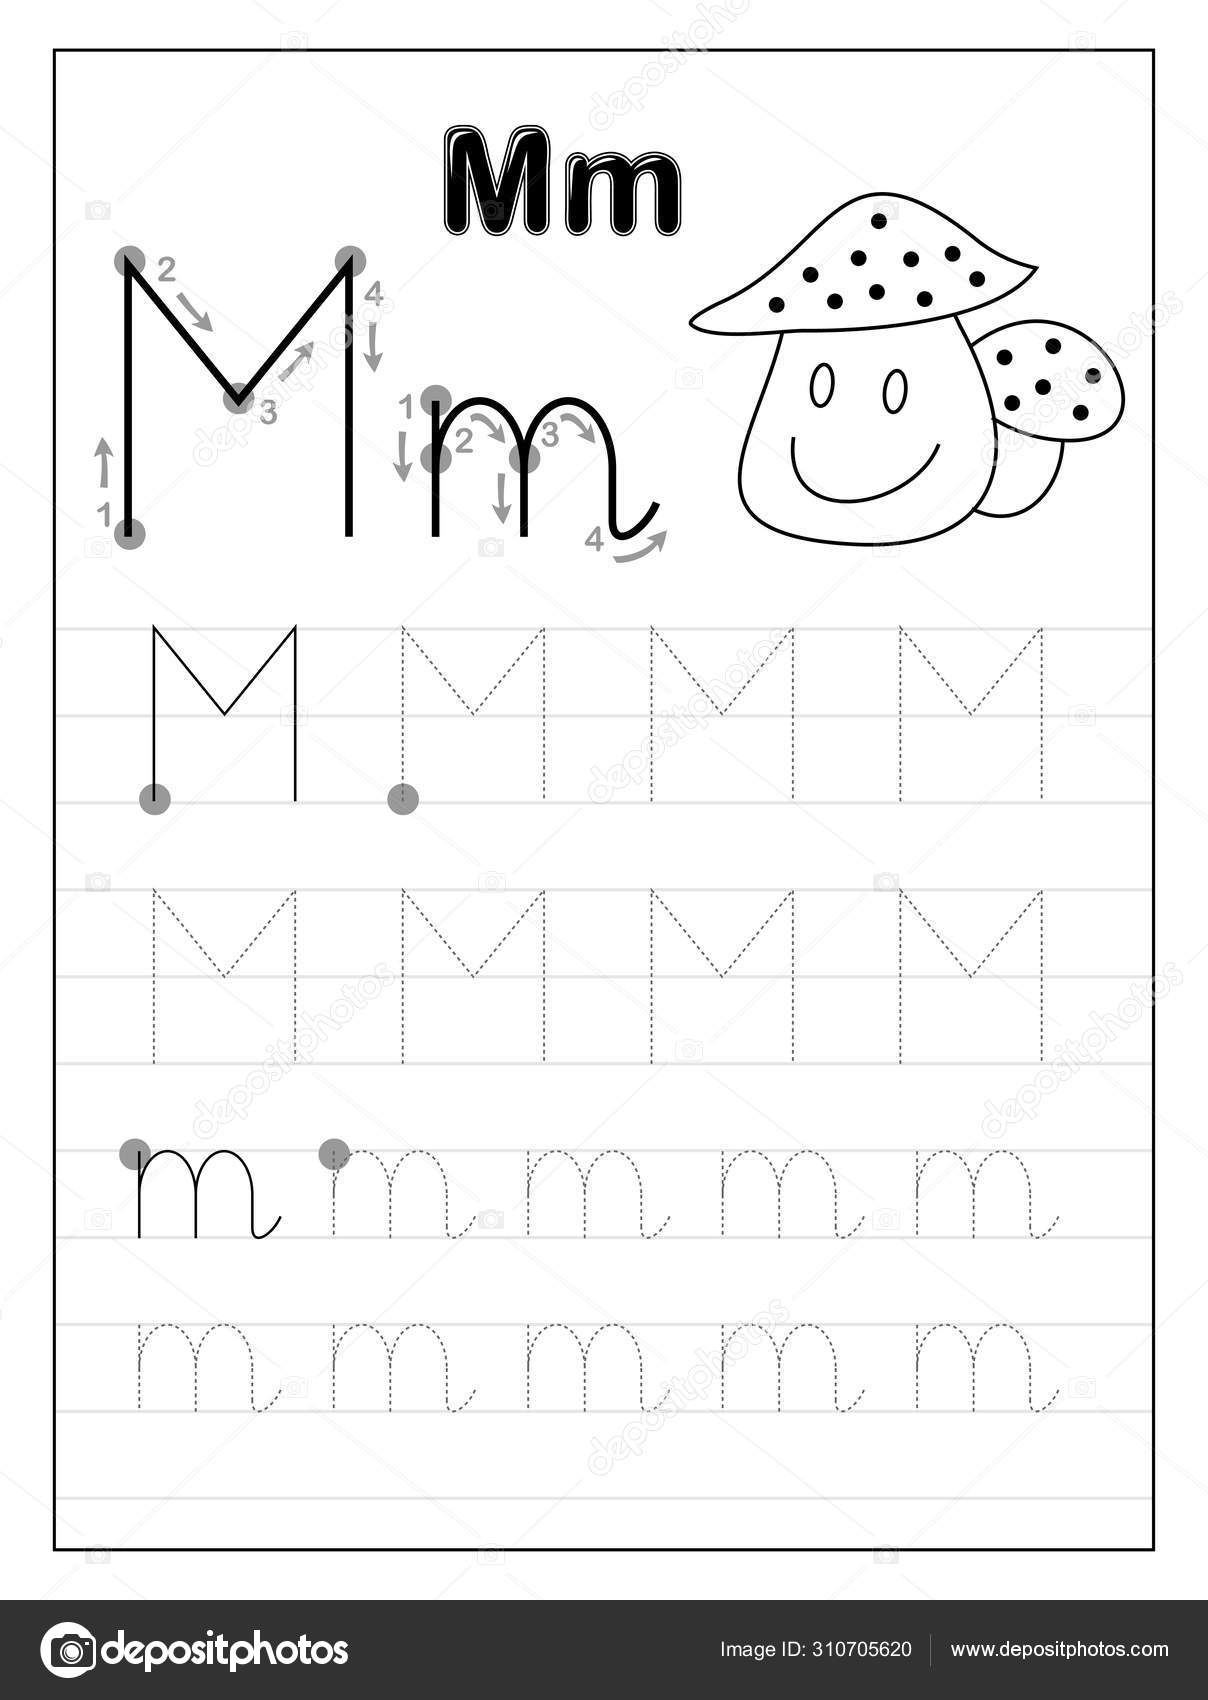 Tracing Alphabet Letter M. Black And White Educational Pages On Line For  Kids. Printable Worksheet For Children Textbook. Developing Skills Of regarding M Letter Tracing